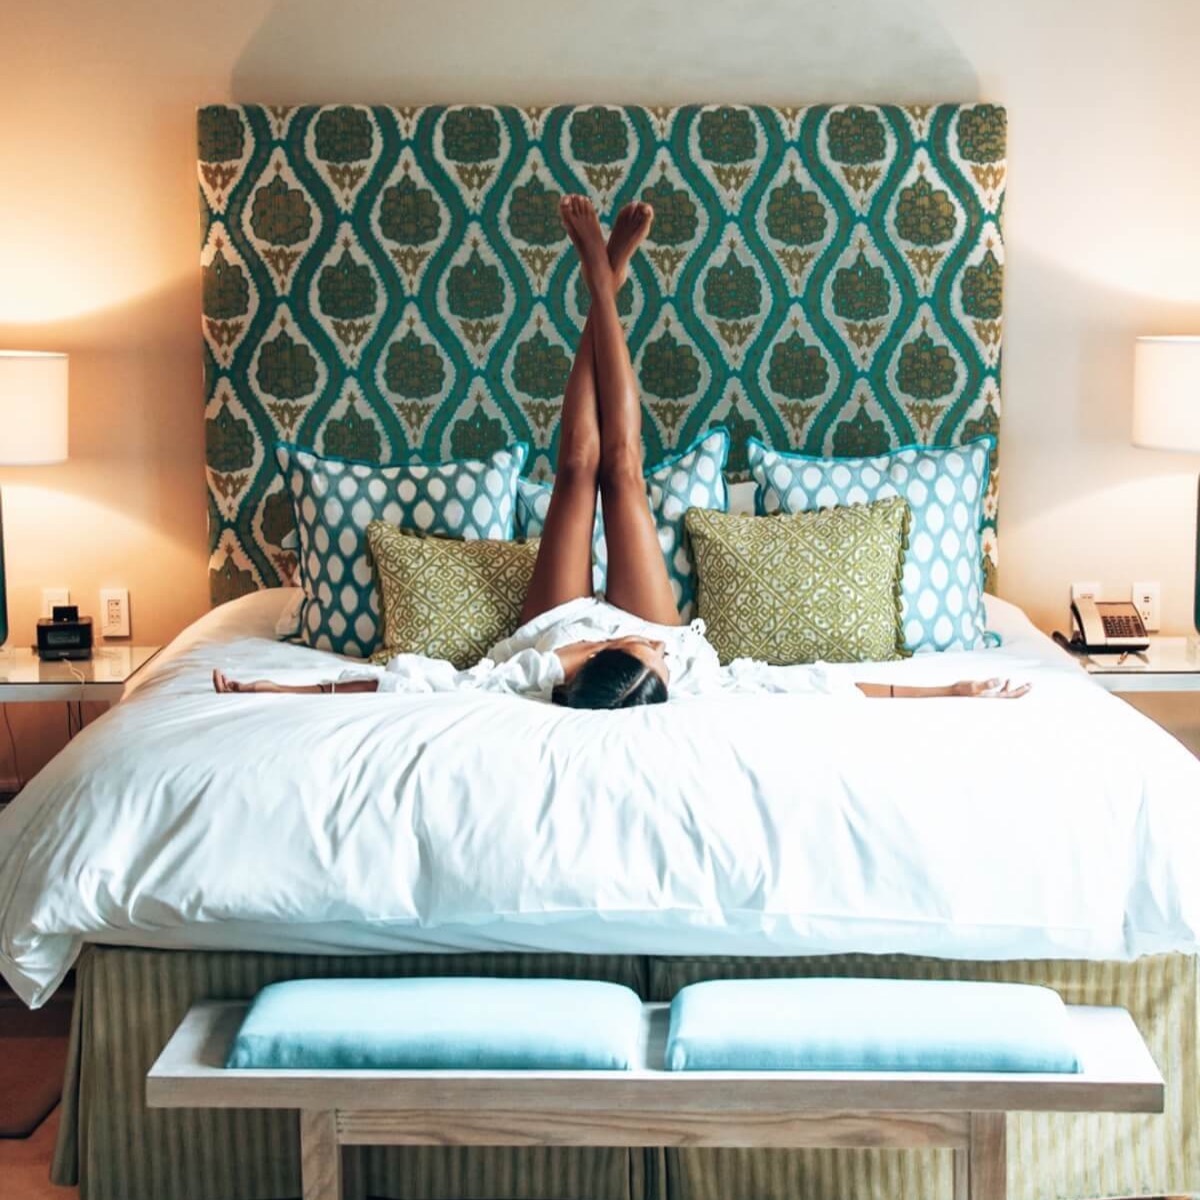 Women with legs up in a hotel bed in Barbados